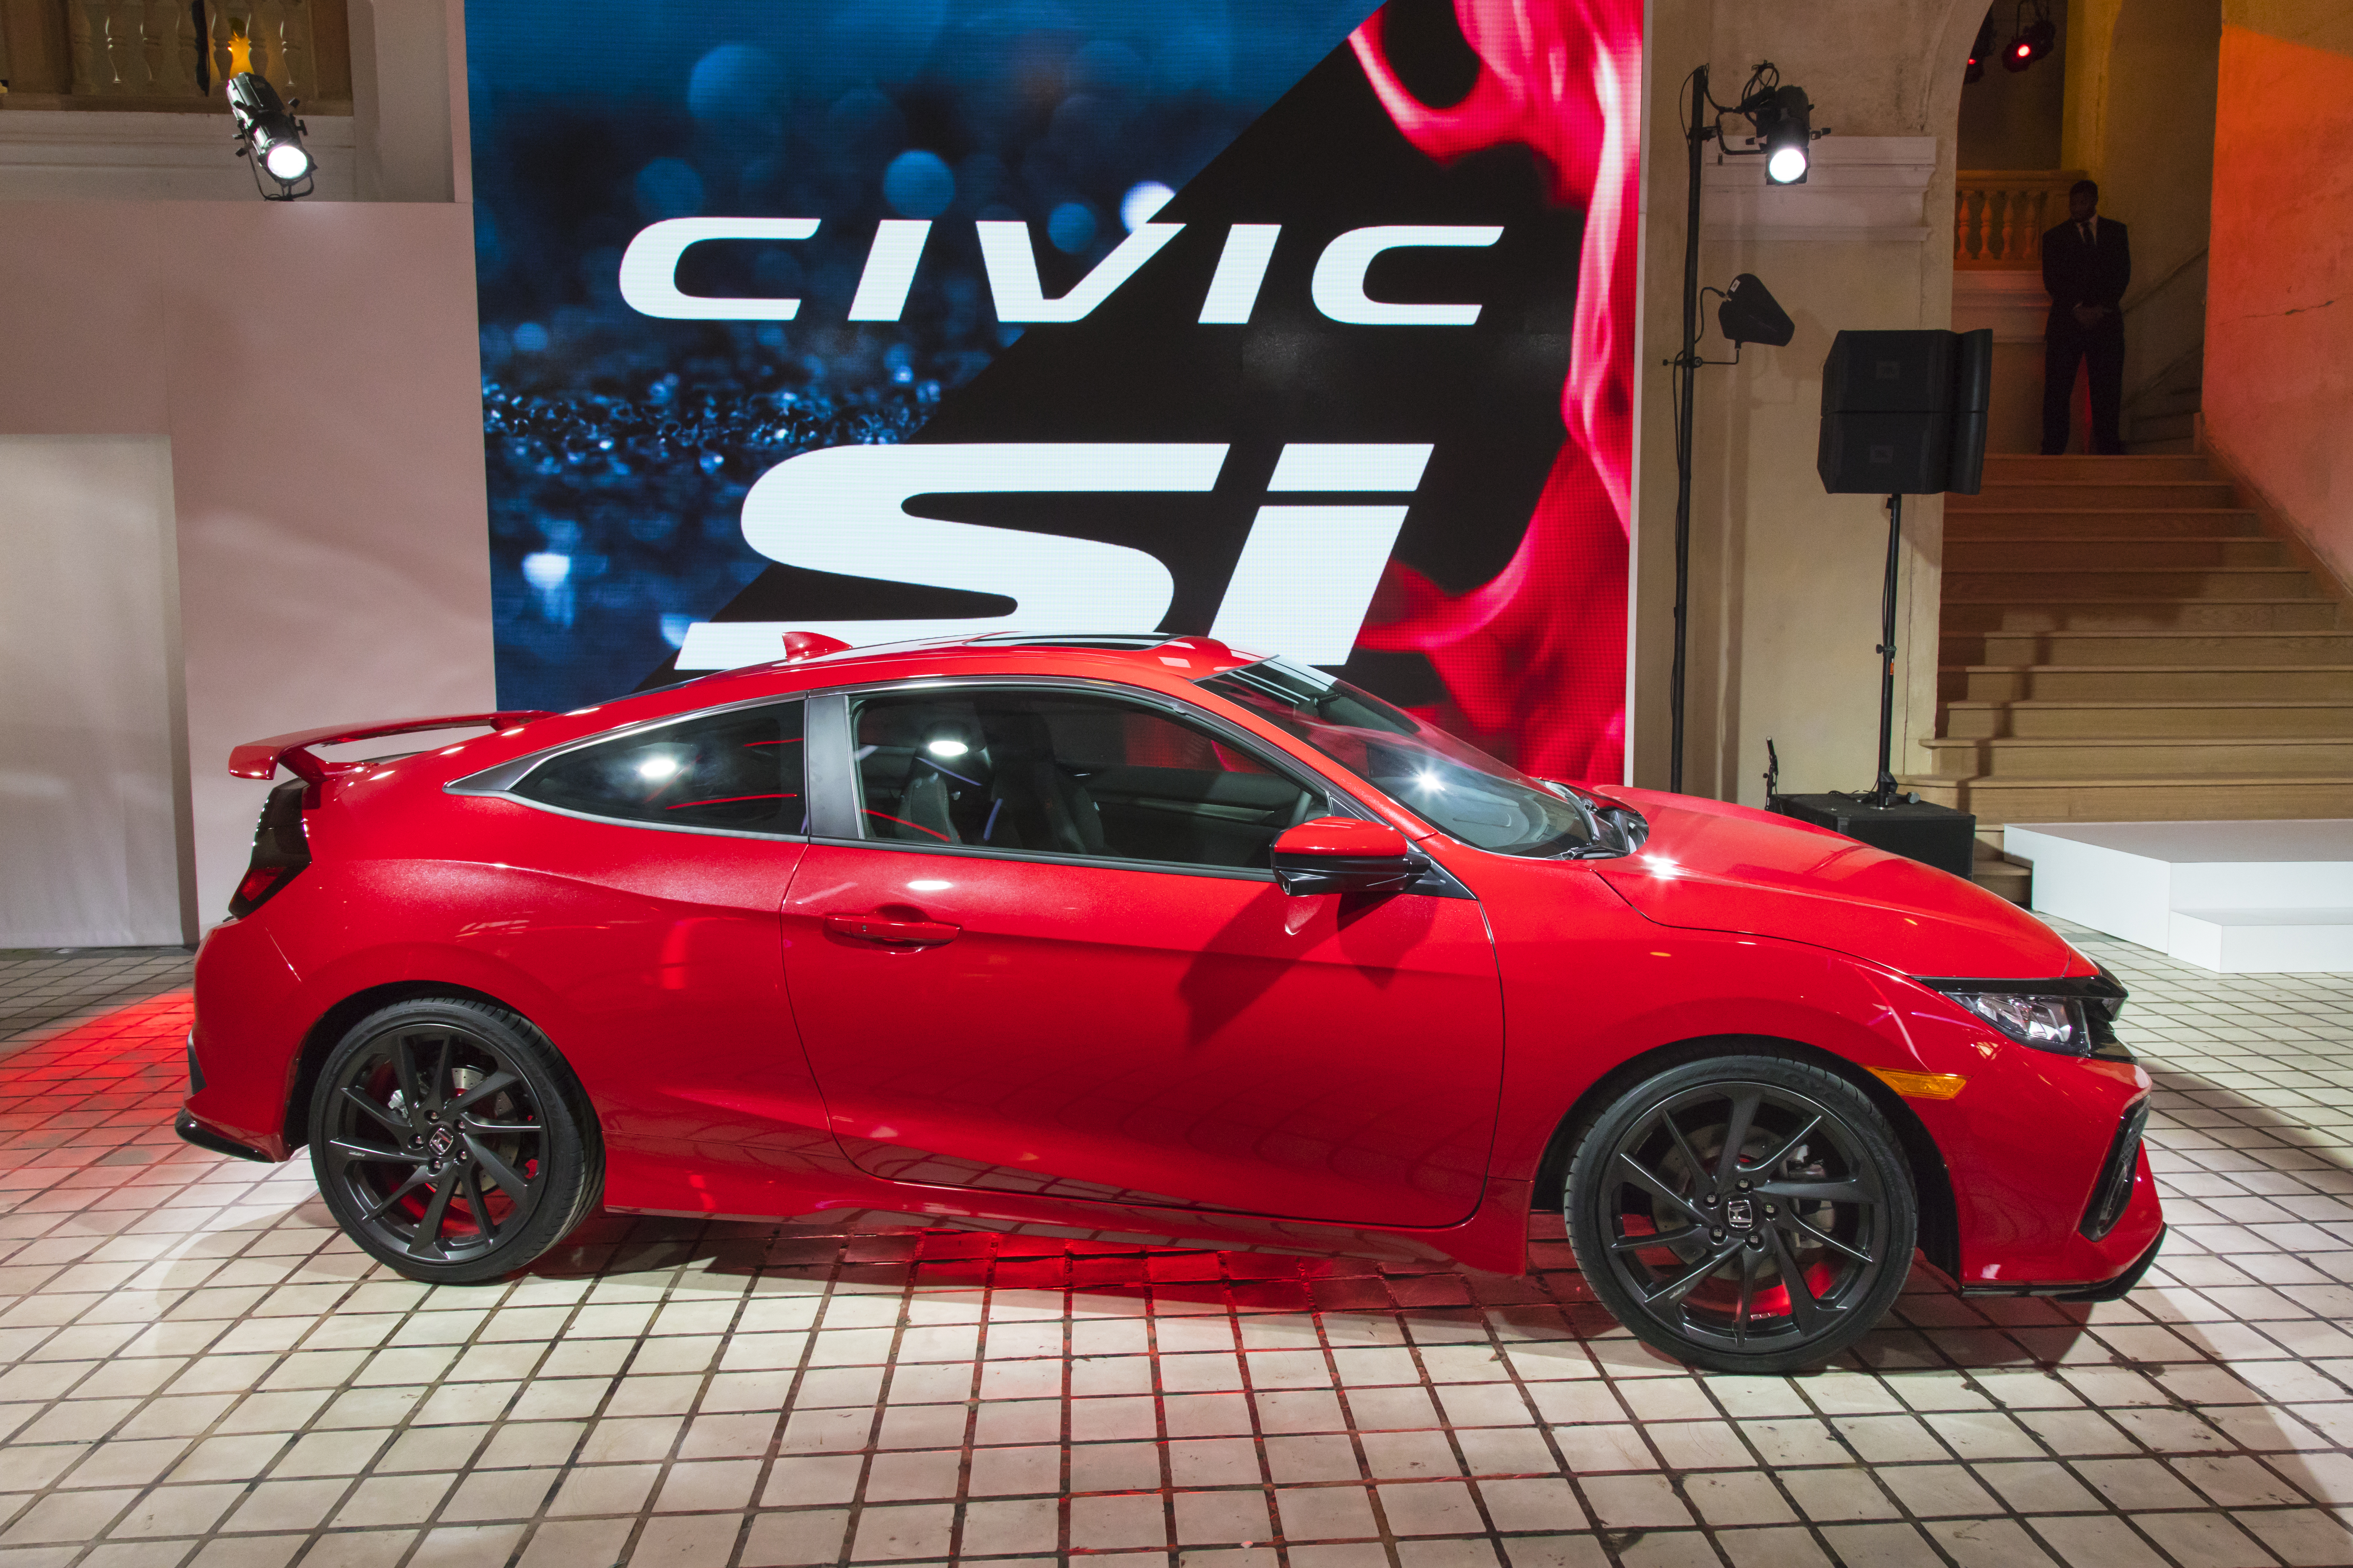 The Civic Si Prototype is revealed in Los Angeles on November 15, 2016.